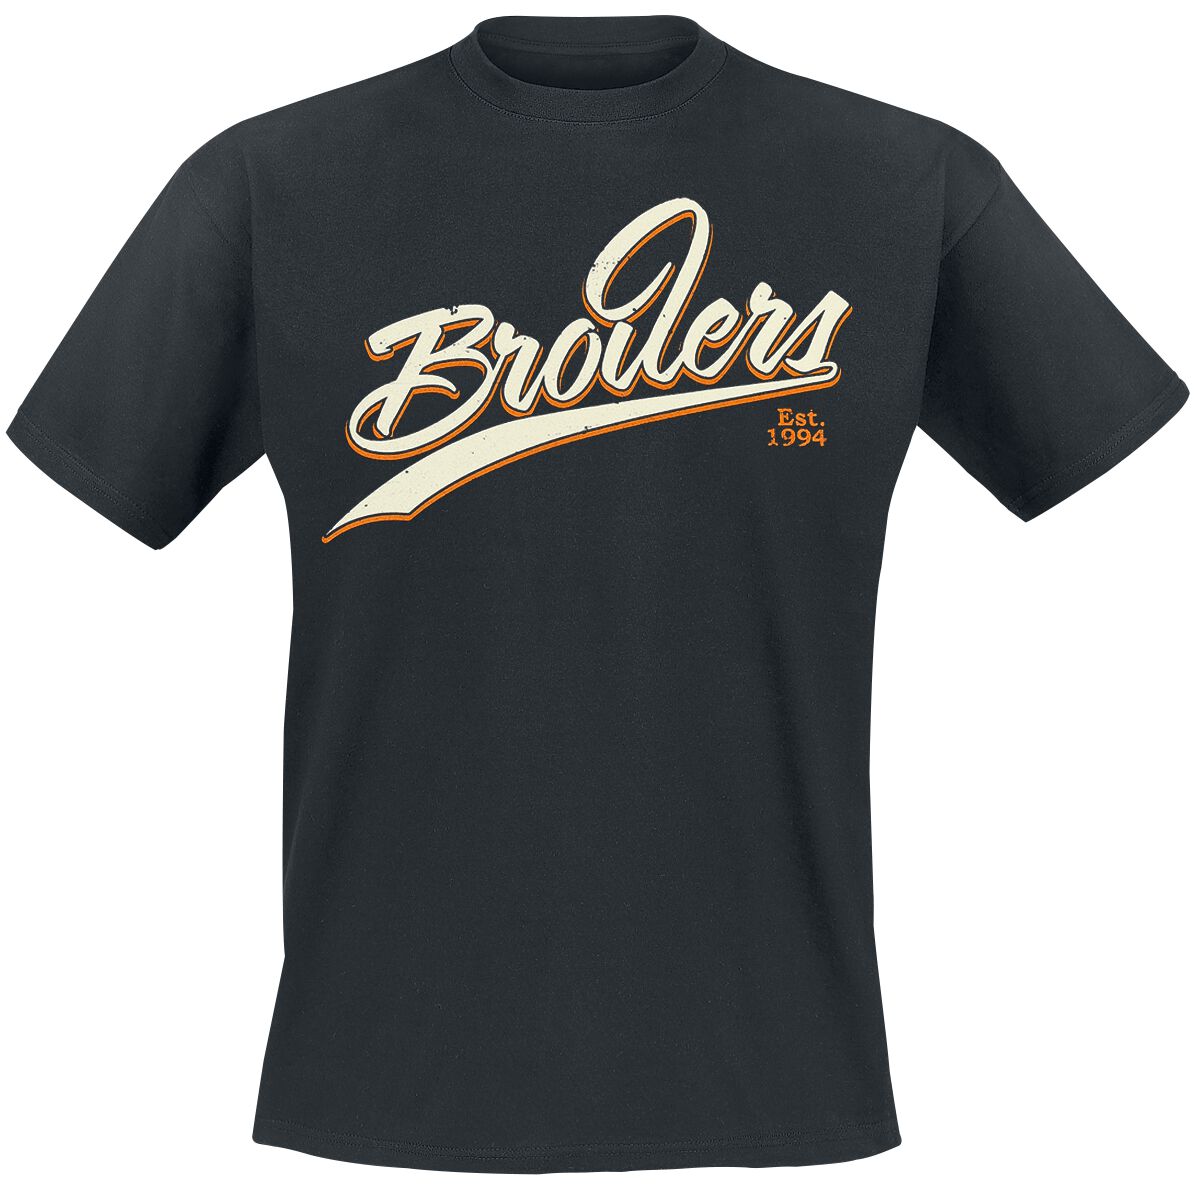 Image of T-Shirt di Broilers - League Of Its Own - L a XXL - Uomo - nero